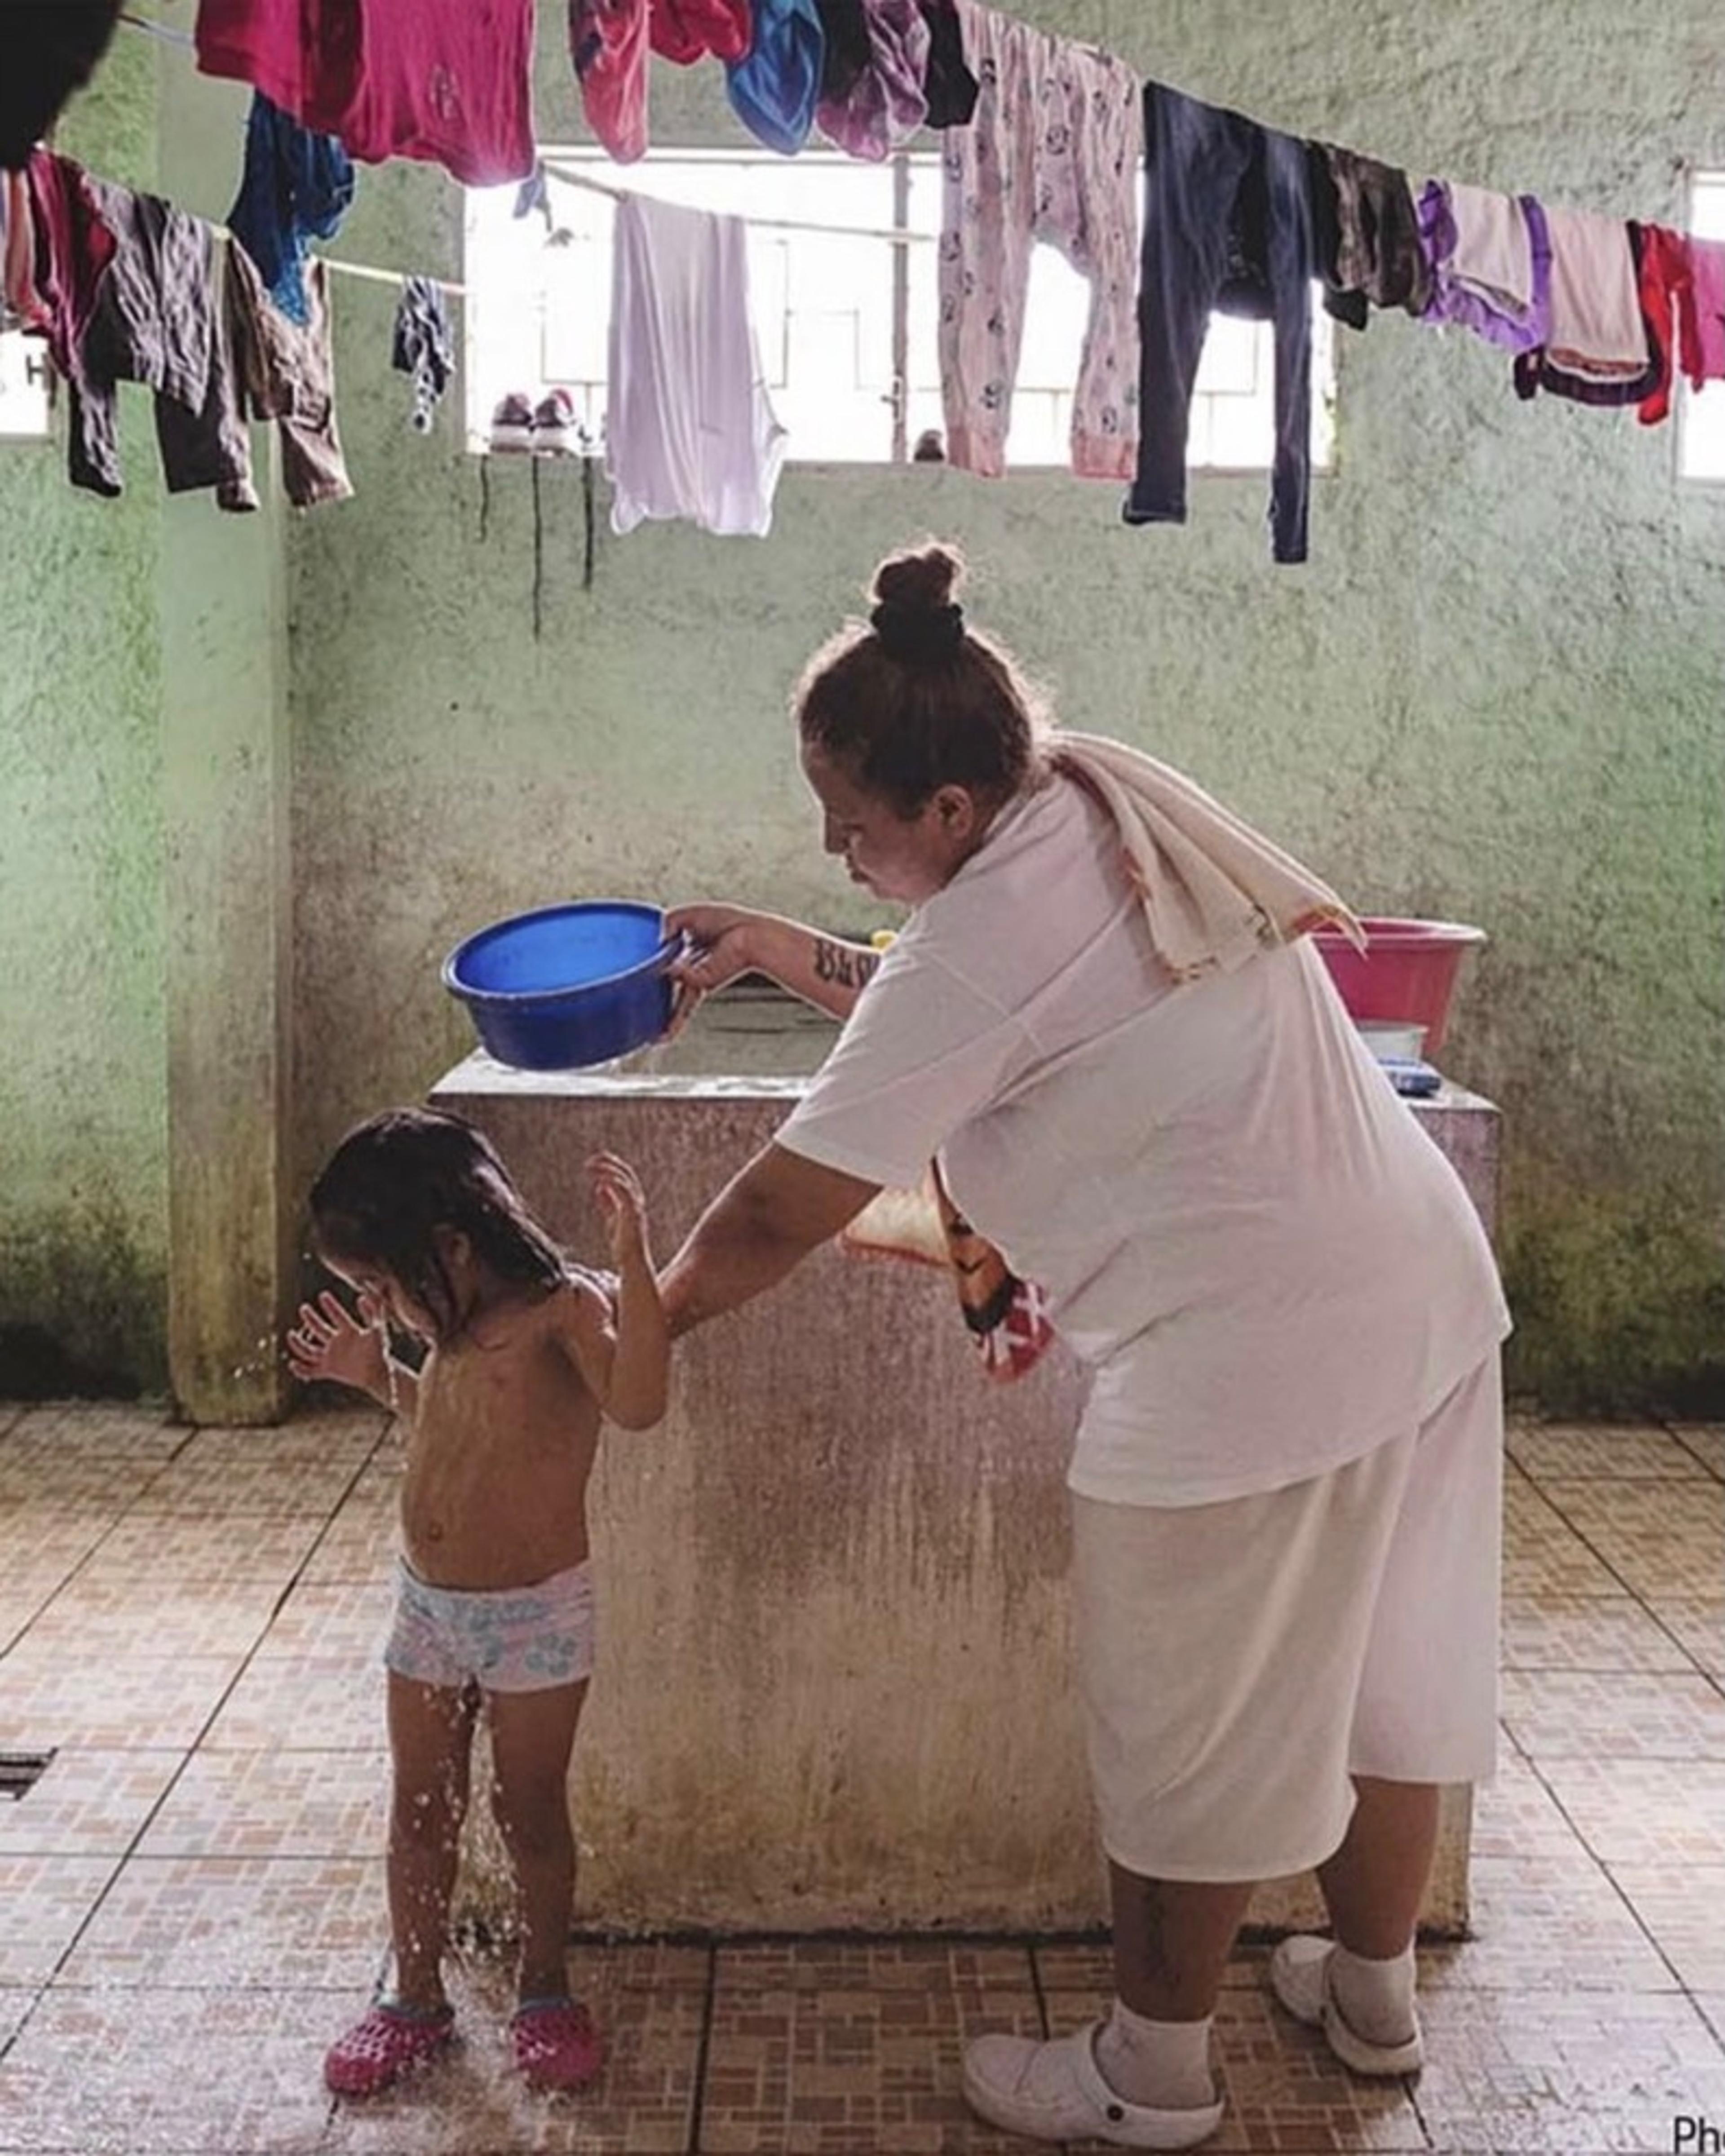 A photograph of a woman bathing a child with a blue bowl, clothes hanging in the background